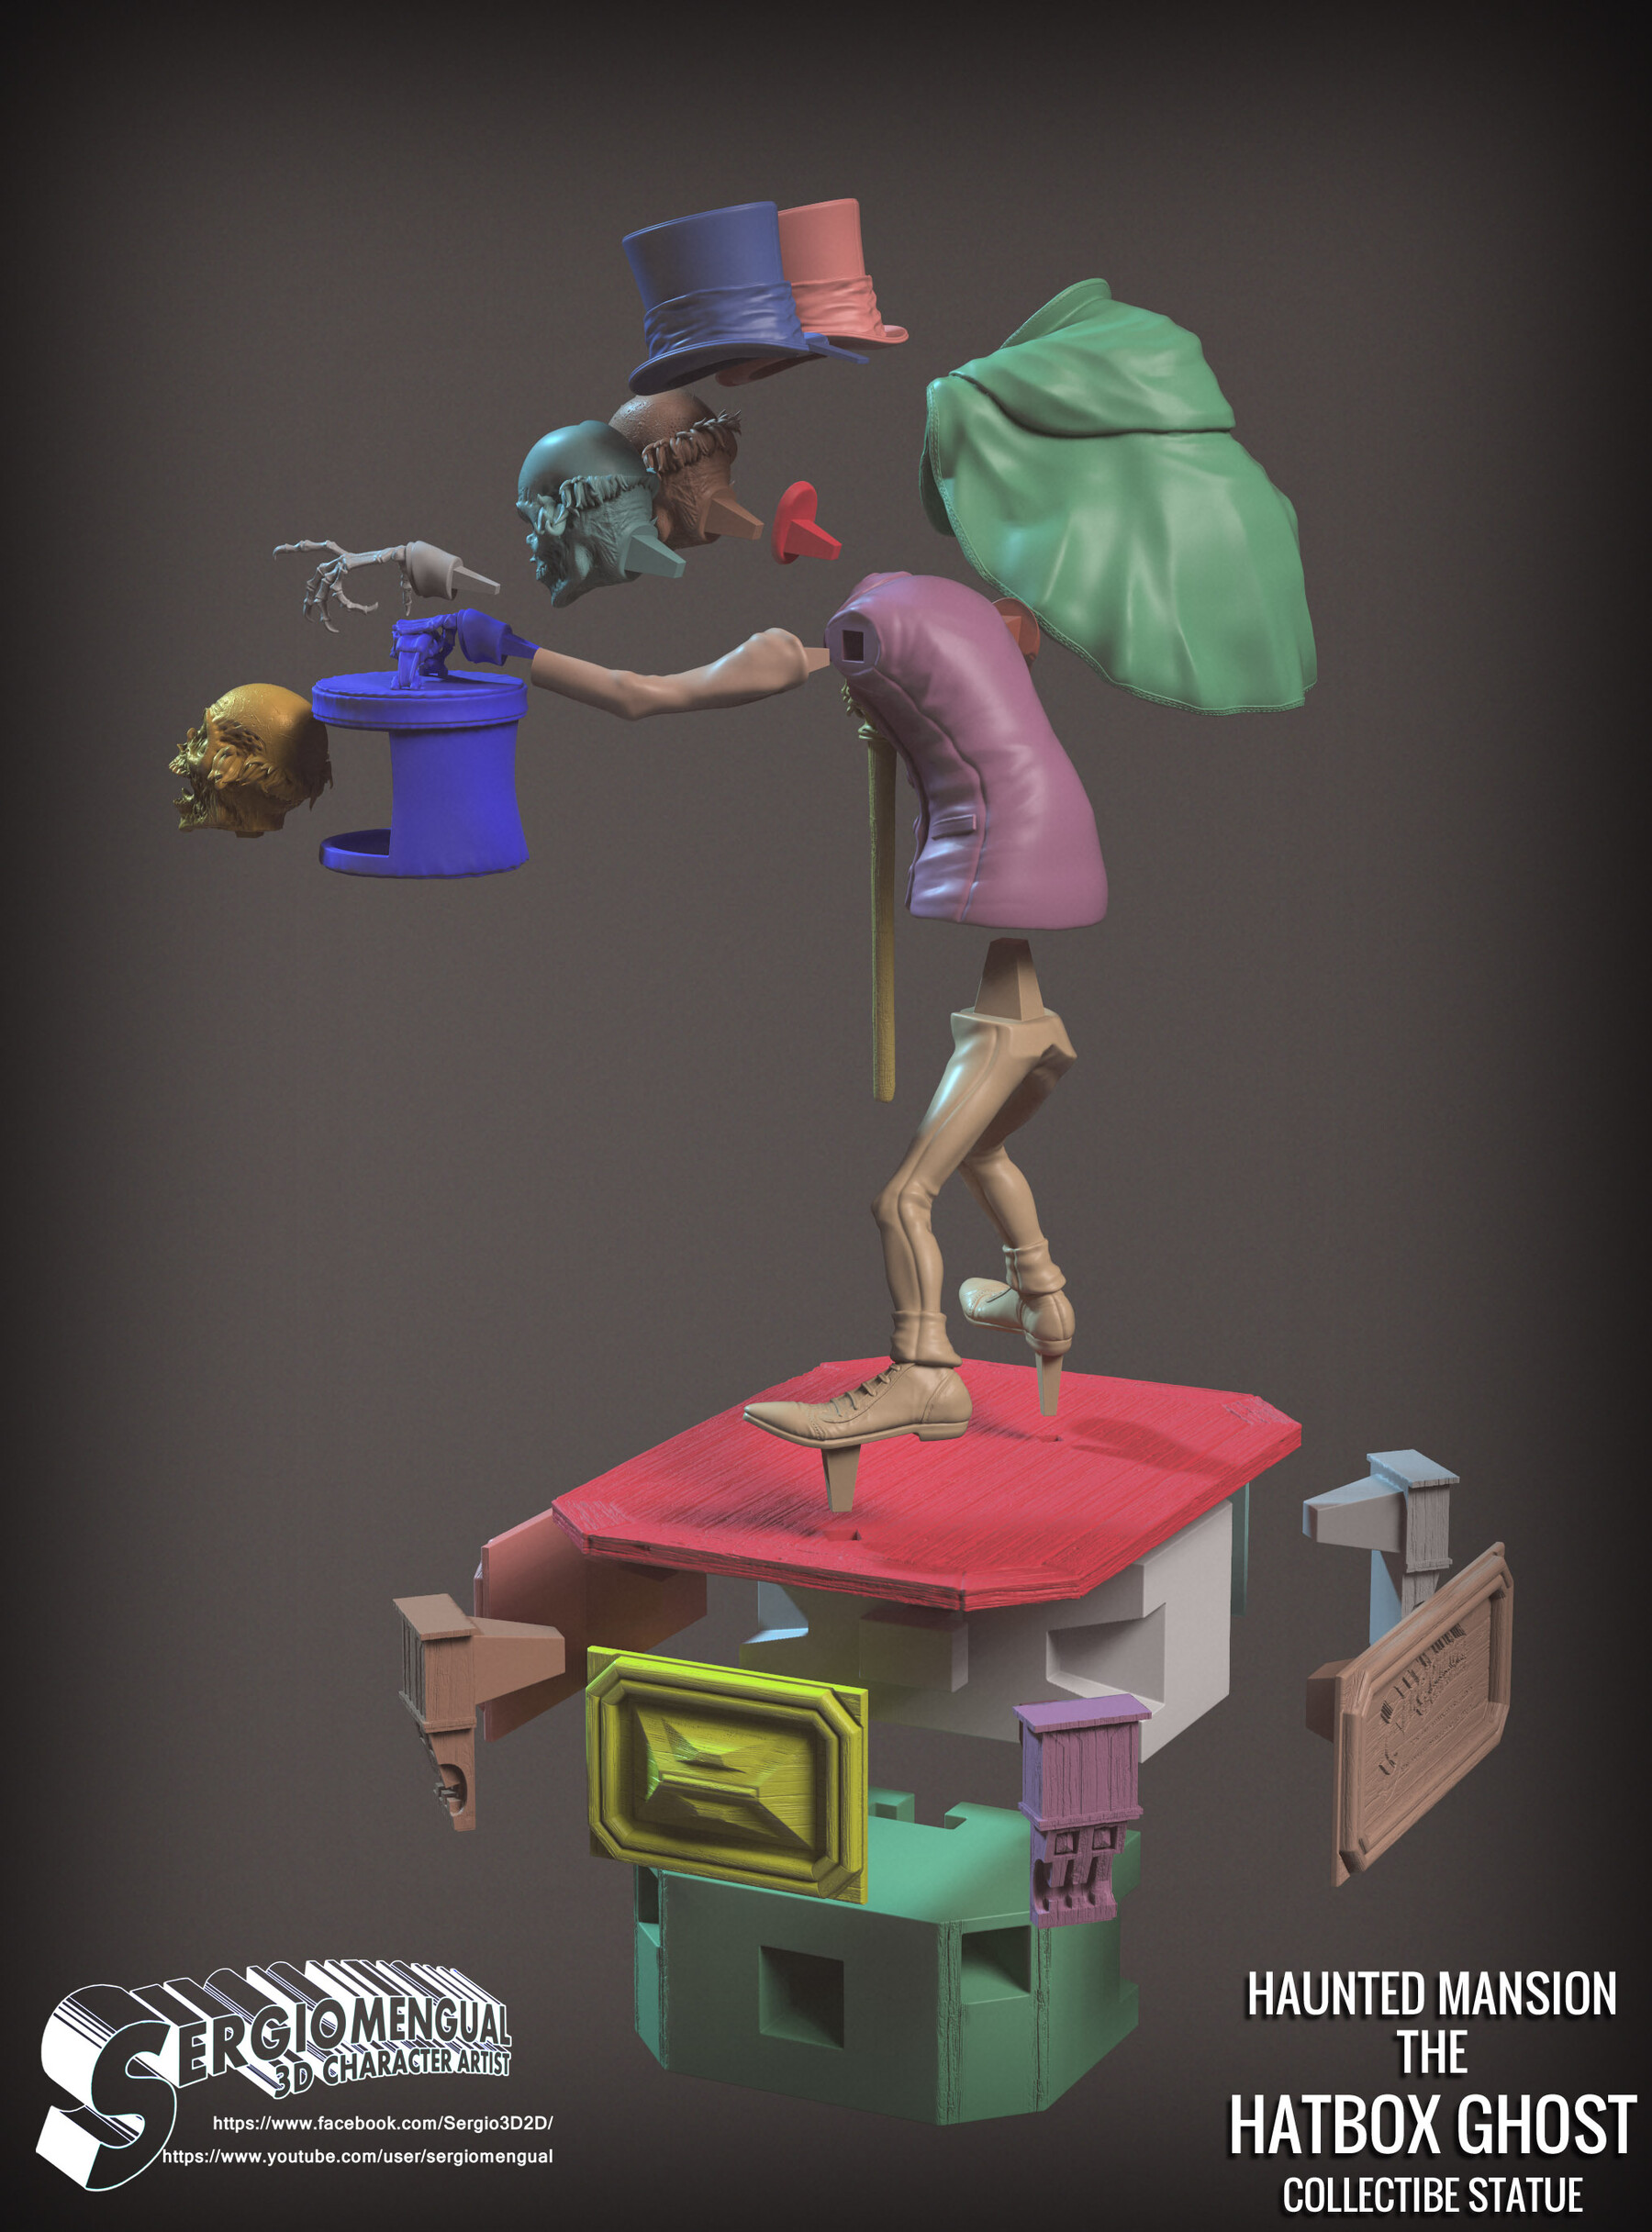 Haunted Mansion Hatbox Ghost Maquette 3D model 3D printable